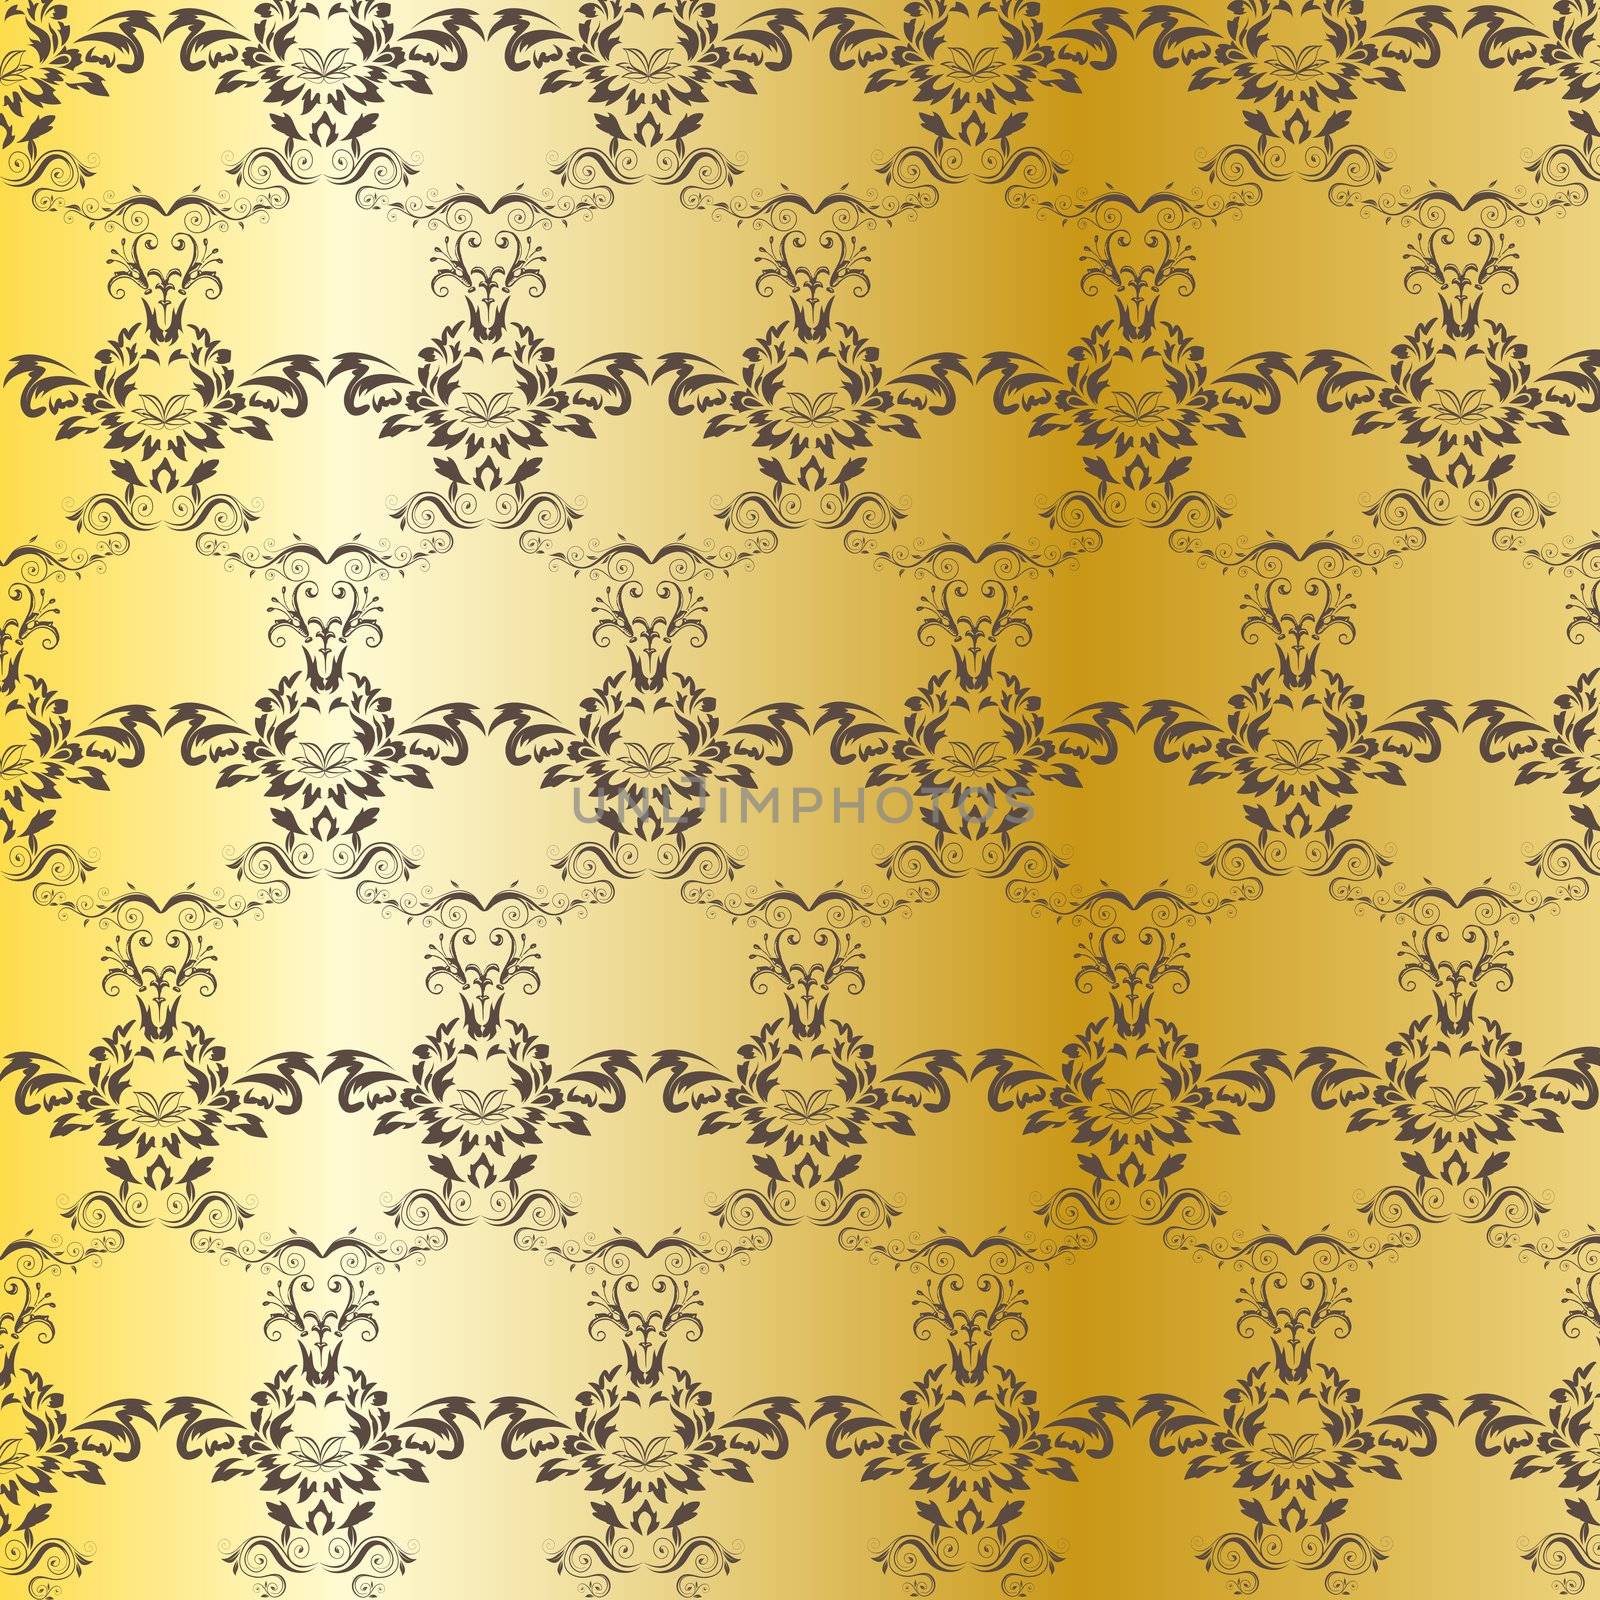 Ornamental background by peromarketing